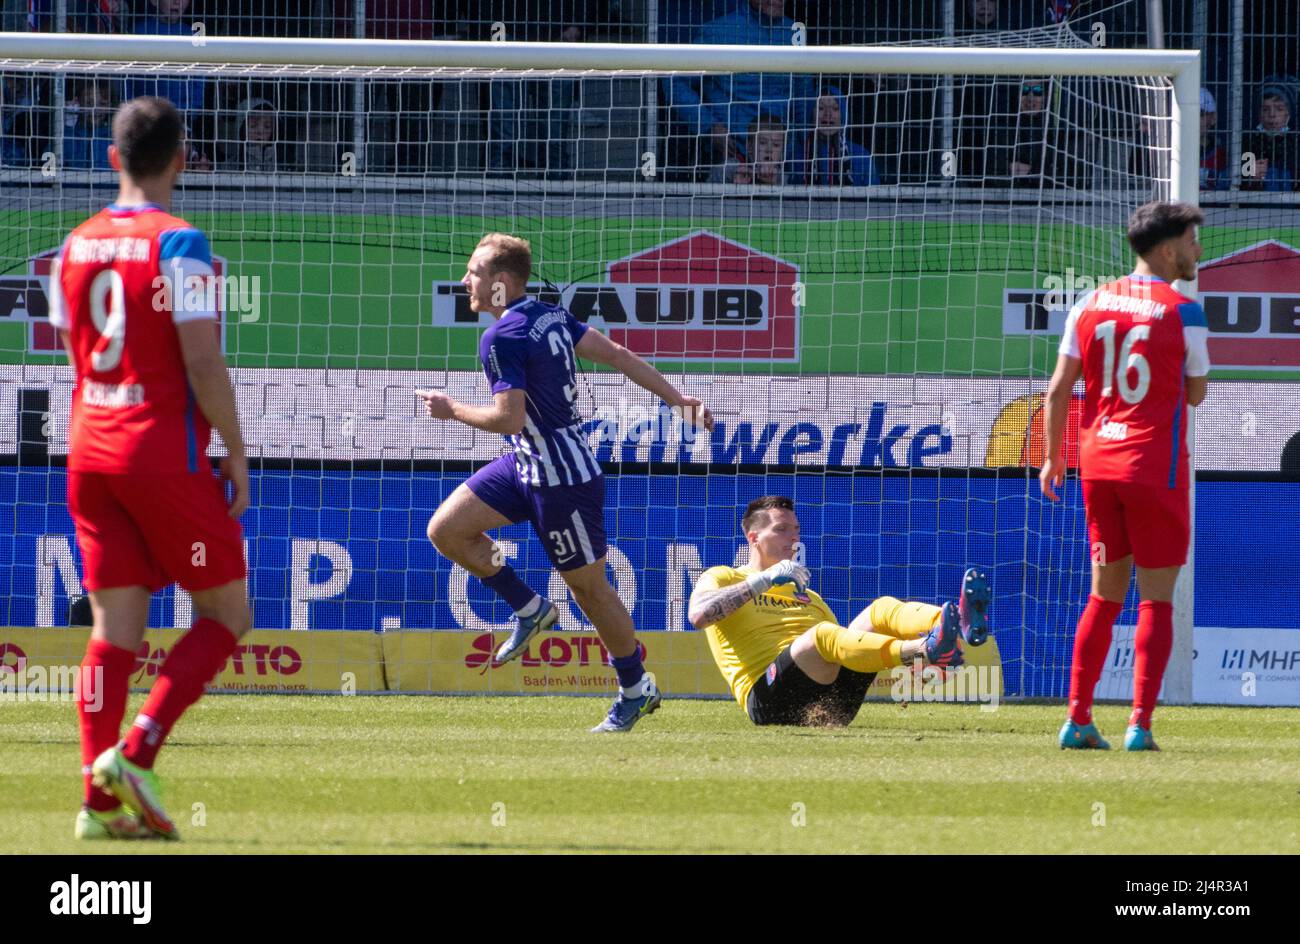 Heidenheim, Germany. 17th Apr, 2022. Soccer: 2nd Bundesliga, 1. FC Heidenheim - Erzgebirge Aue, Matchday 30, Voith-Arena. Aue's Ben Zolinski (2.vl) celebrates after his goal for 0:2. Credit: Stefan Puchner/dpa - IMPORTANT NOTE: In accordance with the requirements of the DFL Deutsche Fußball Liga and the DFB Deutscher Fußball-Bund, it is prohibited to use or have used photographs taken in the stadium and/or of the match in the form of sequence pictures and/or video-like photo series./dpa/Alamy Live News Stock Photo